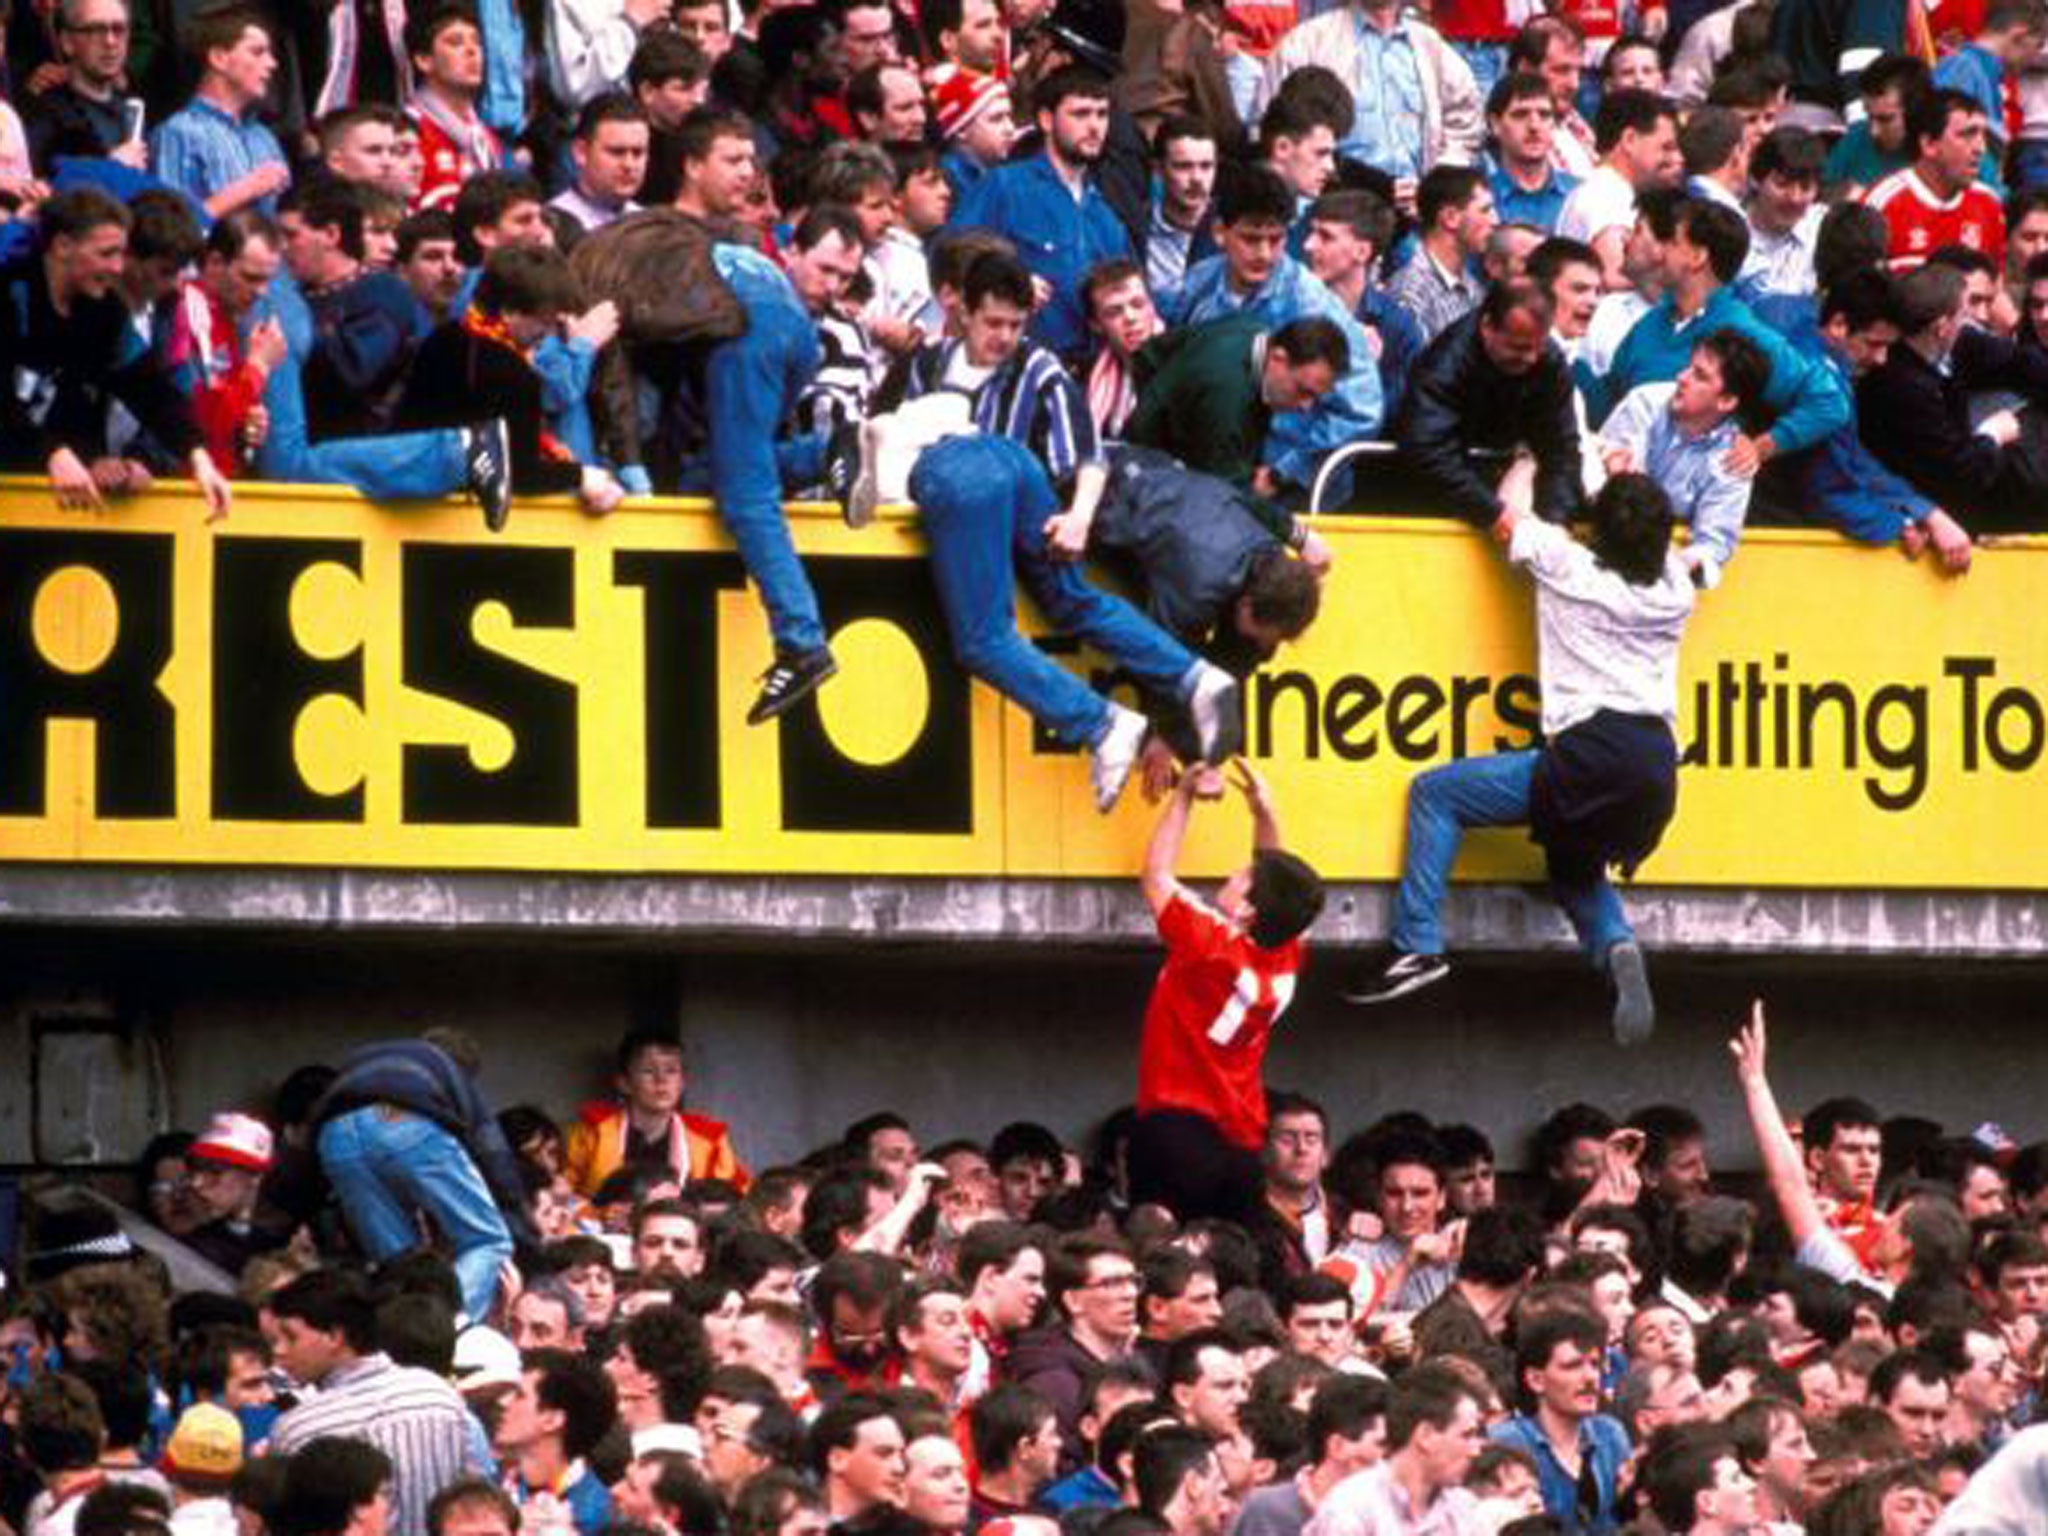 Football fans escape from being crushed in the stands at Hillsborough Stadium